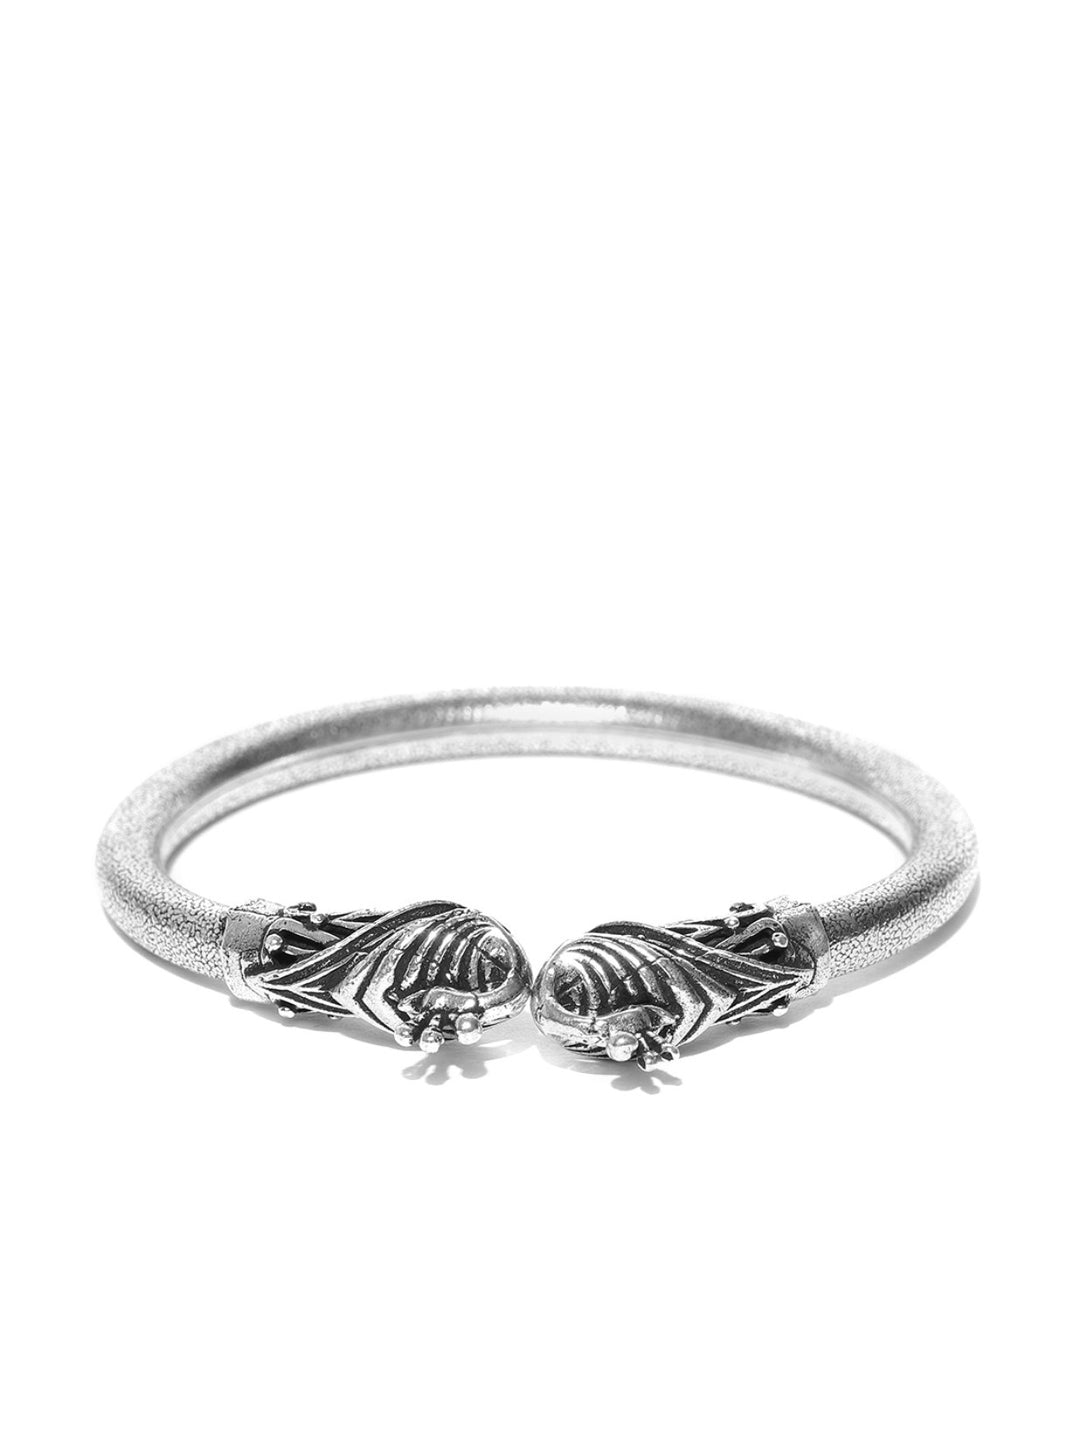 Oxidized Peacock Inspired German Silver Bracelet For Girls And Women